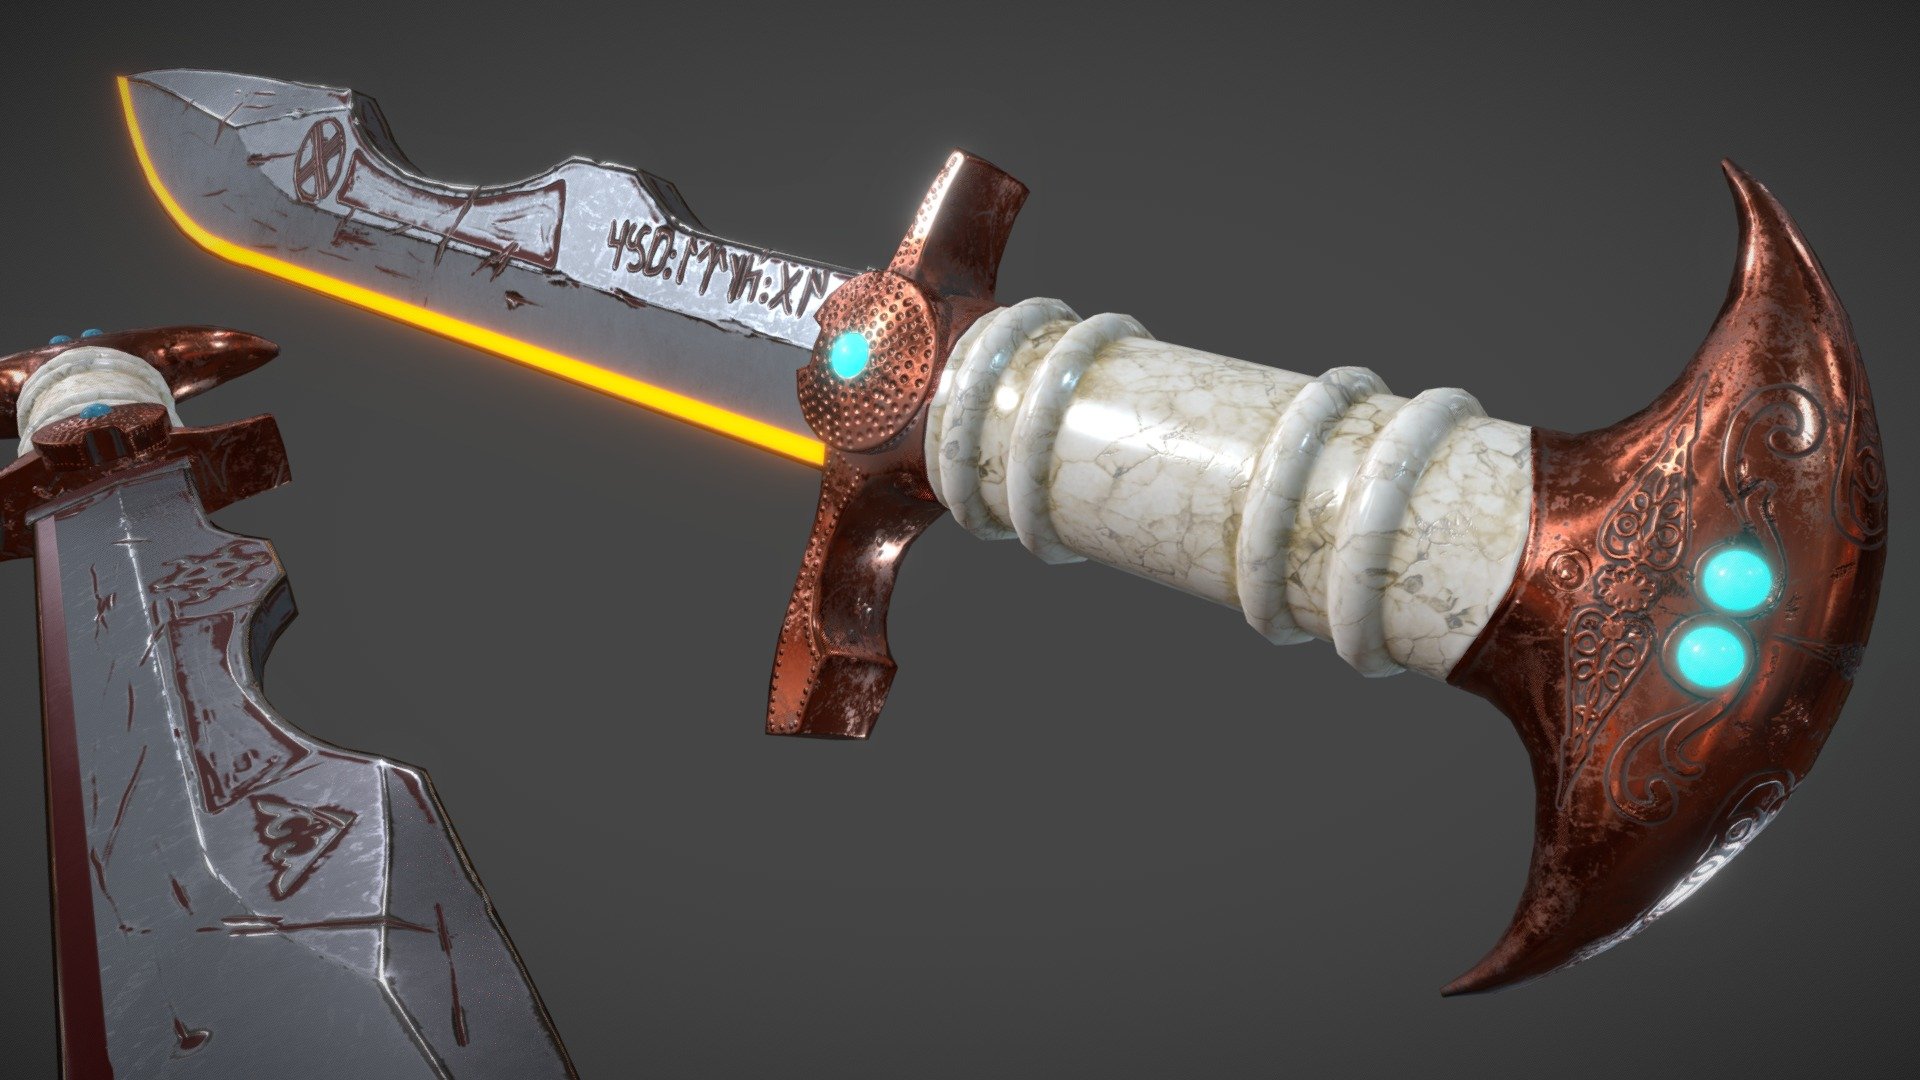 Hi everyone, i have completed modelling my knife with 4K PBR textures. I designed this knife a few month ago for my school project, at last i have modelled in the last two days 3d model